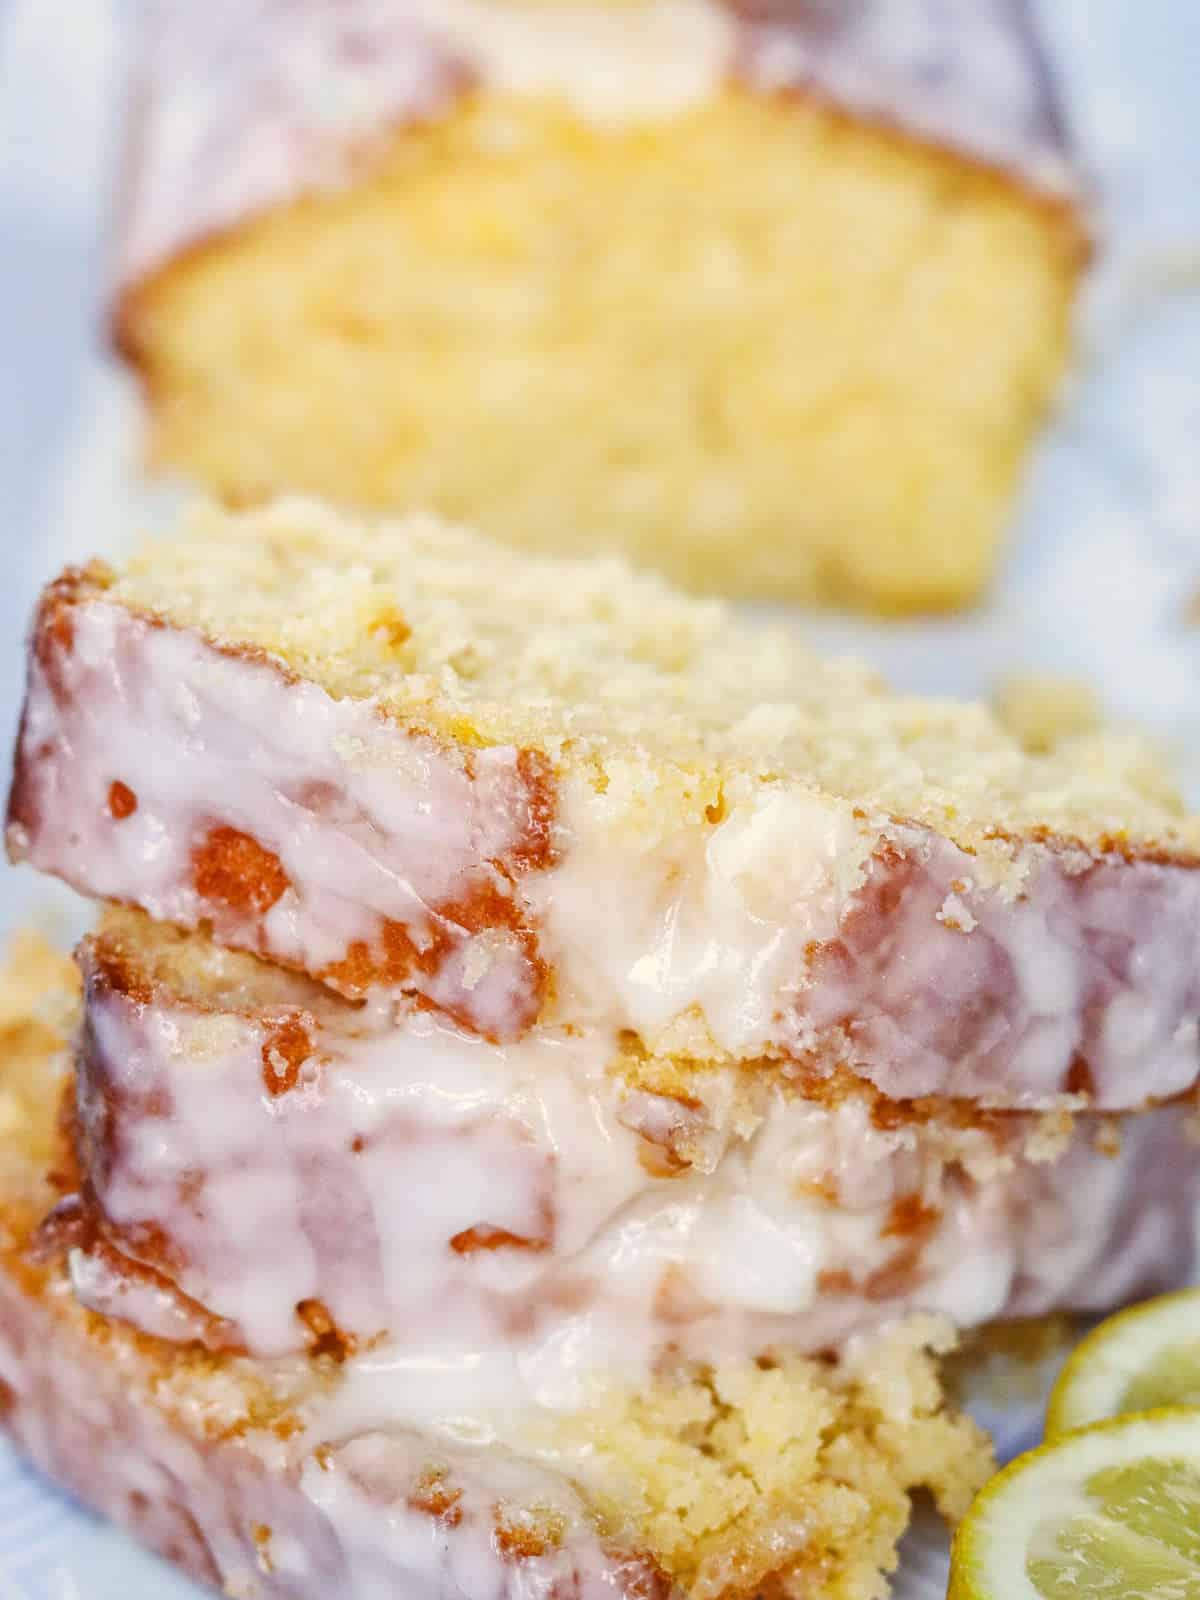 lemon loaf cake with icing drizzled on top.